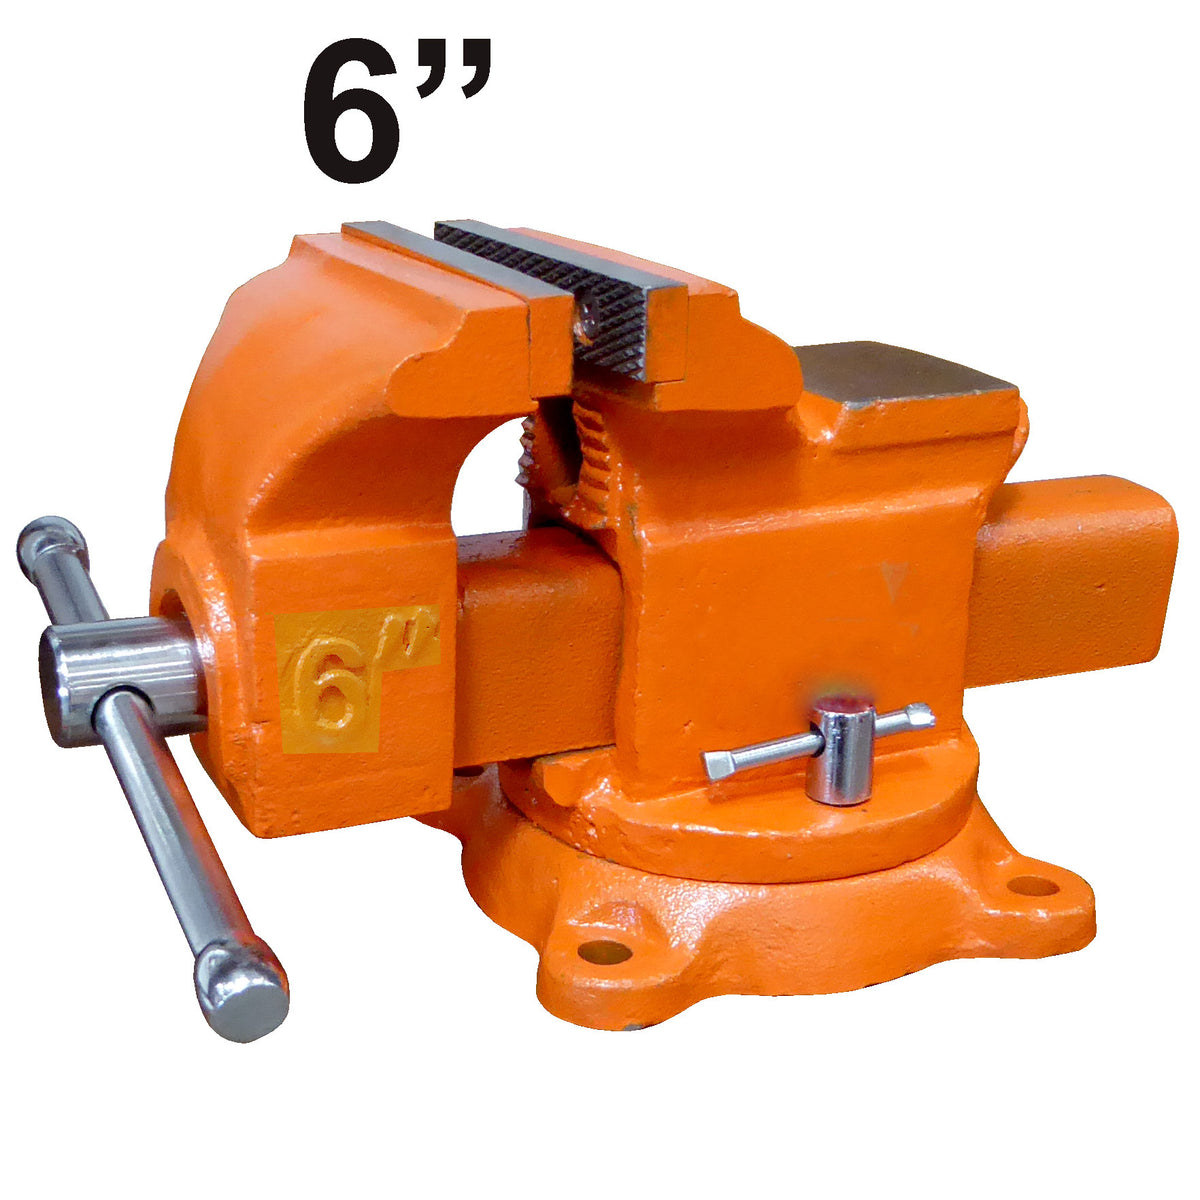 6" Bench Vise with Anvil Swivel Locking Base Table top Clamp Heavy Duty Steel